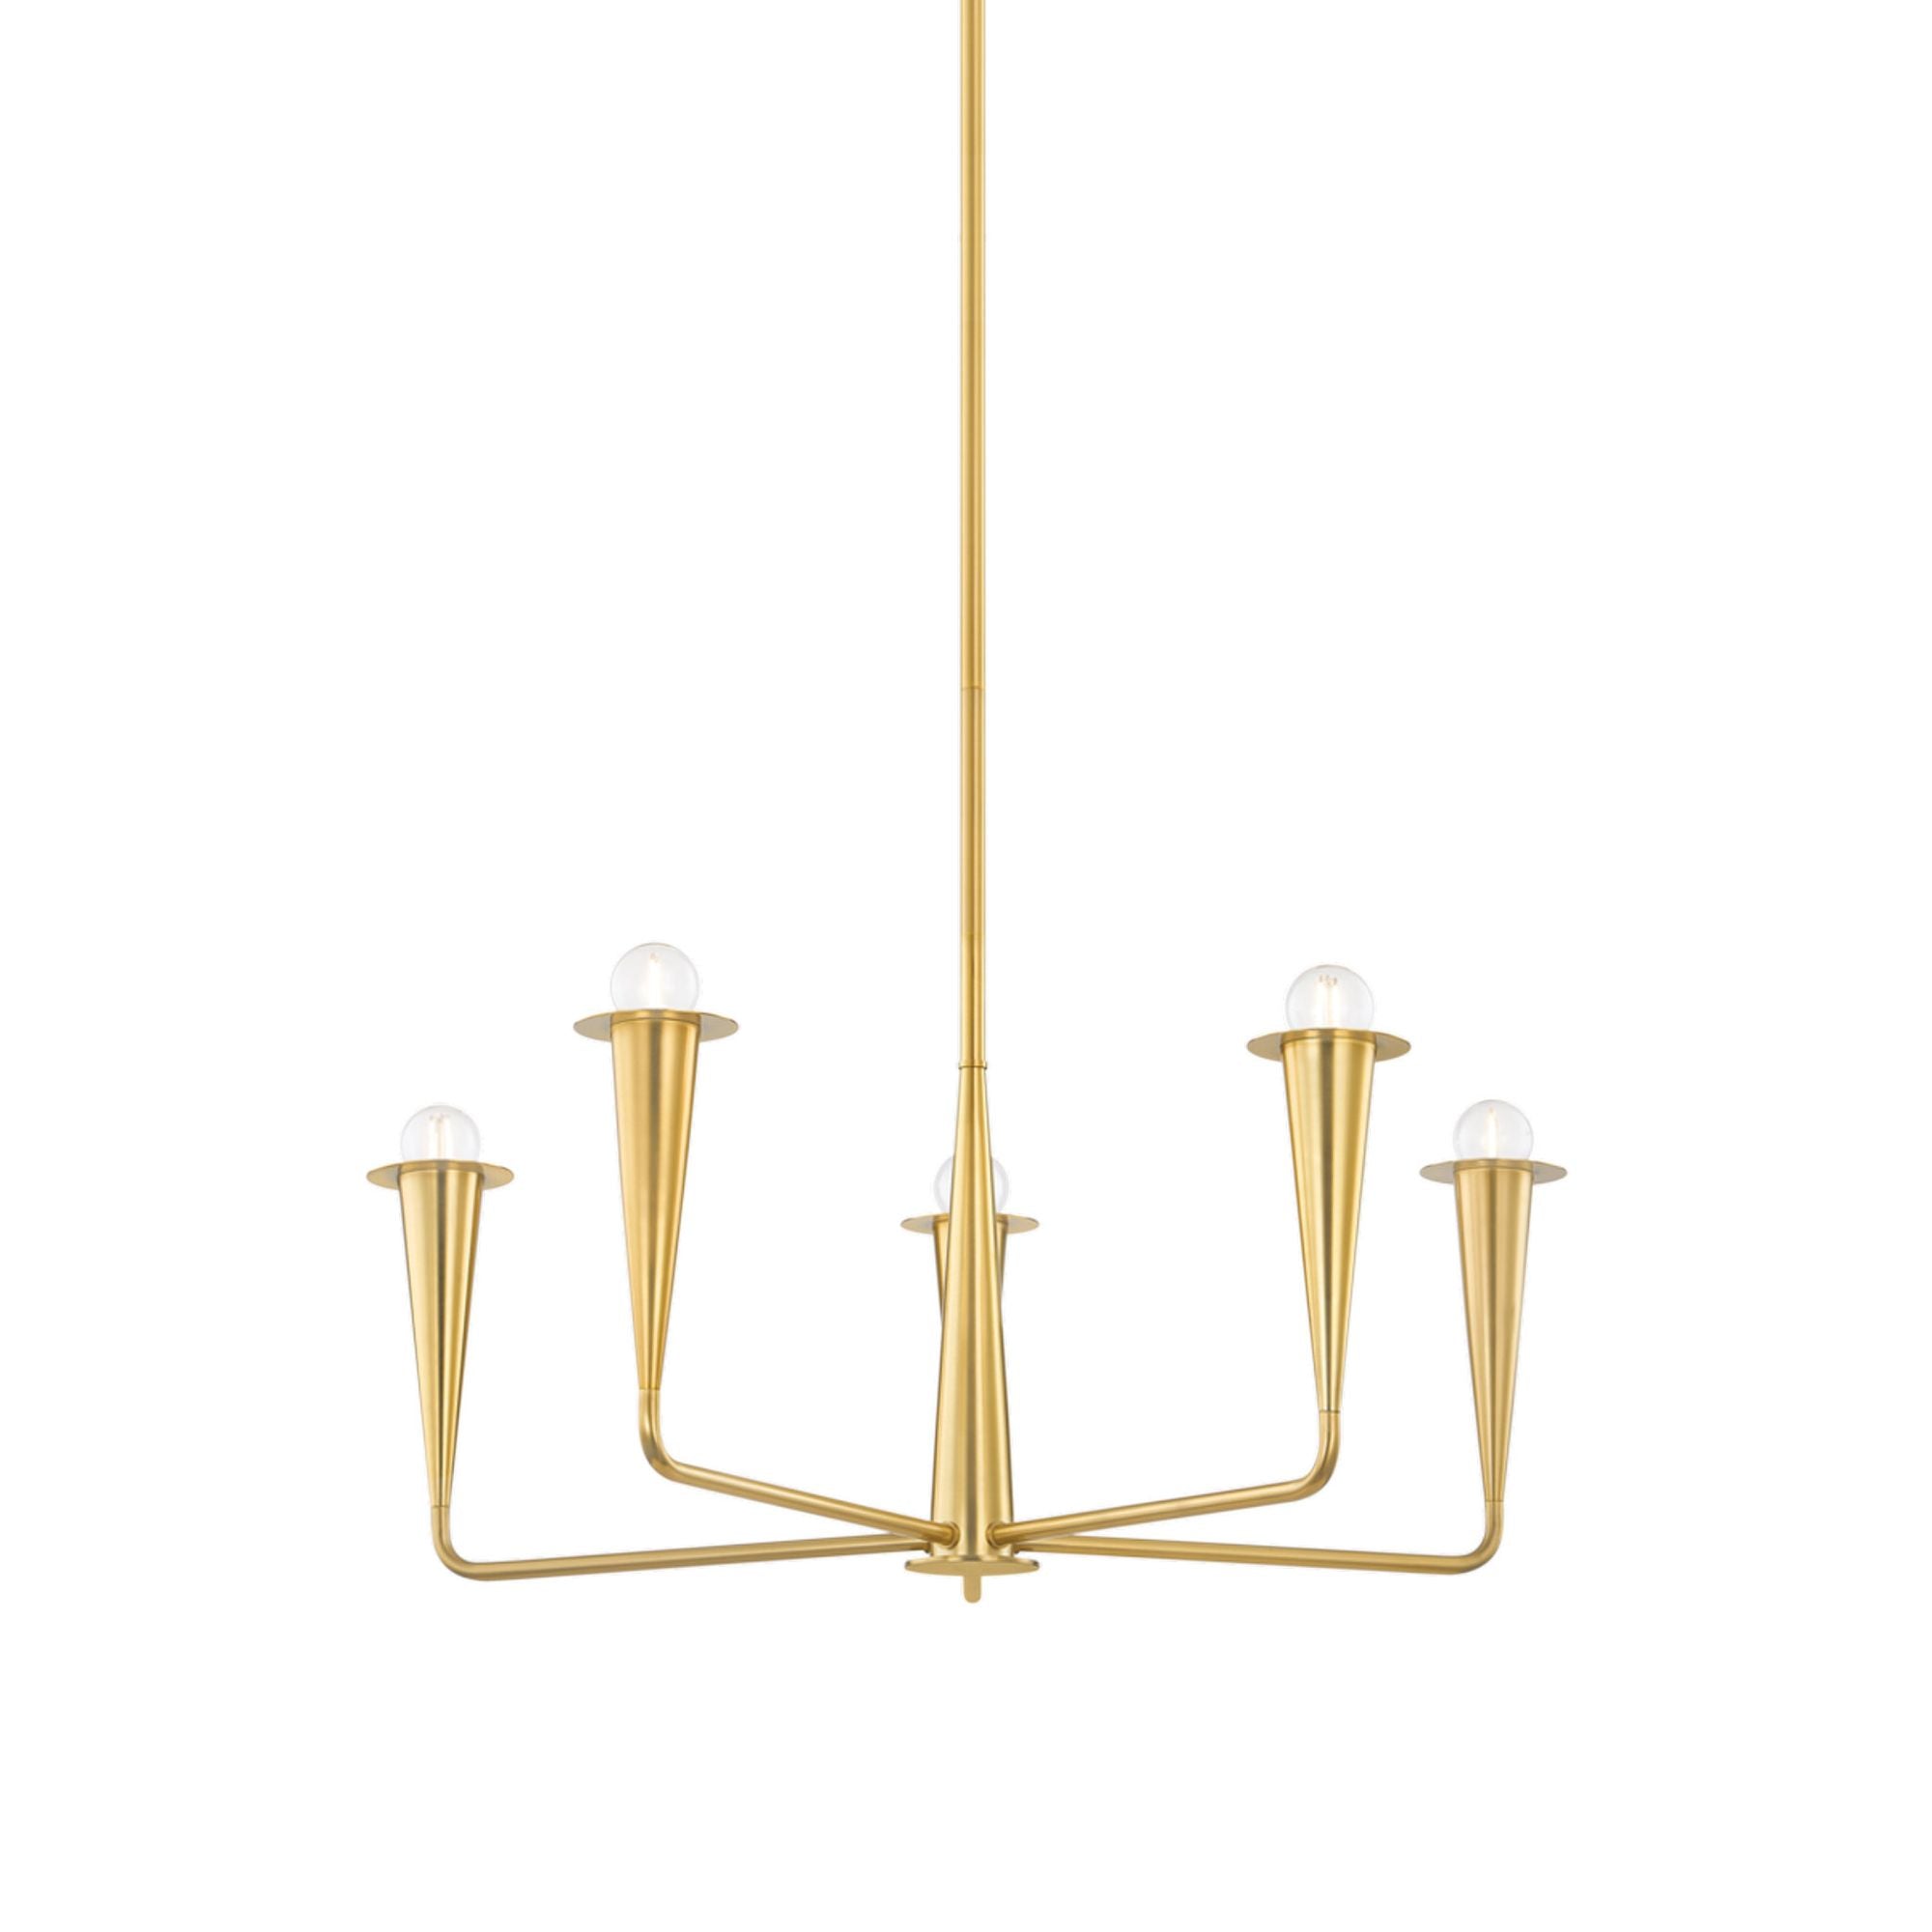 Danna 5-Light Chandelier in Aged Brass by The Lifestyled Co